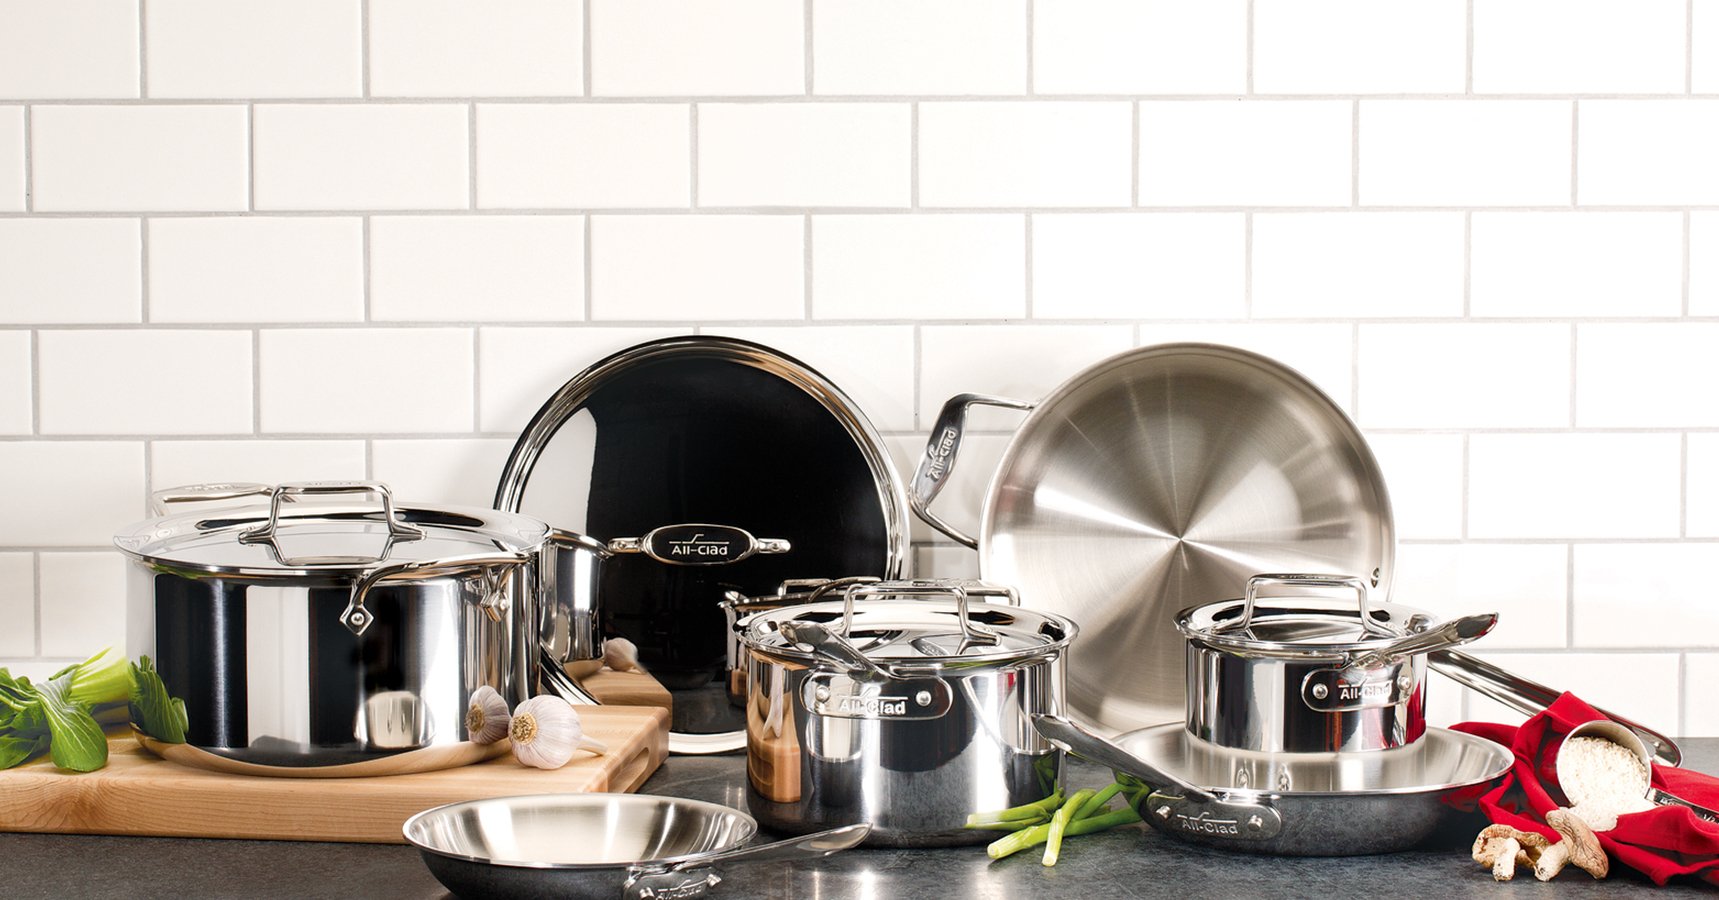 All-Clad VIP Factory Seconds Sale: Get high-quality cookware at